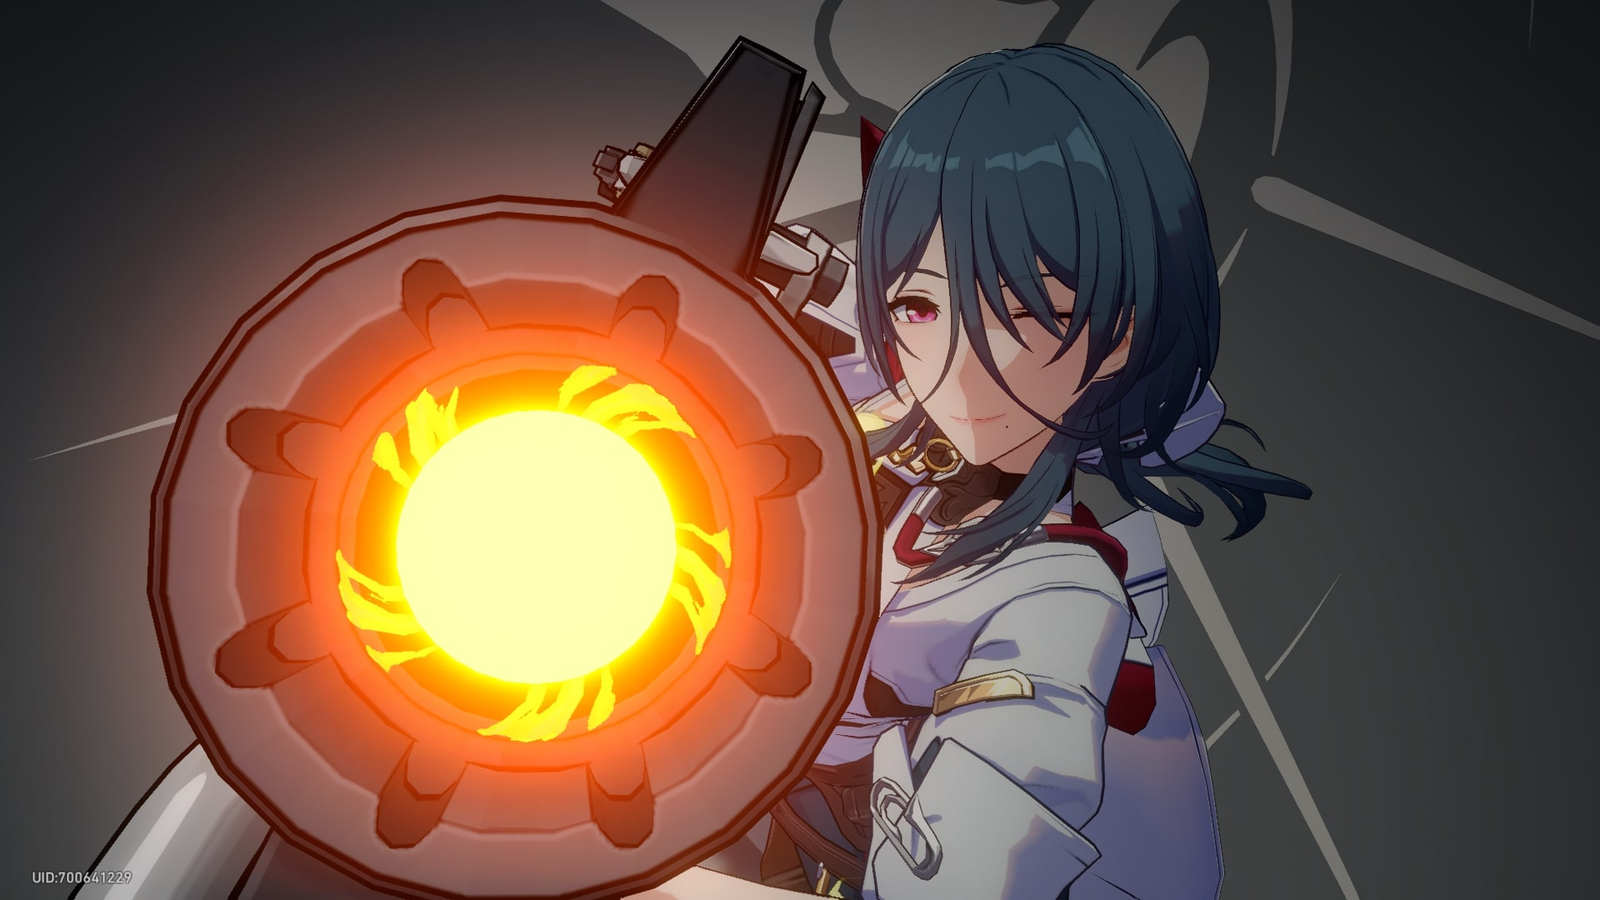 Honkai Star Rail: Top 4 Four-Star Characters You Should Pull And Build